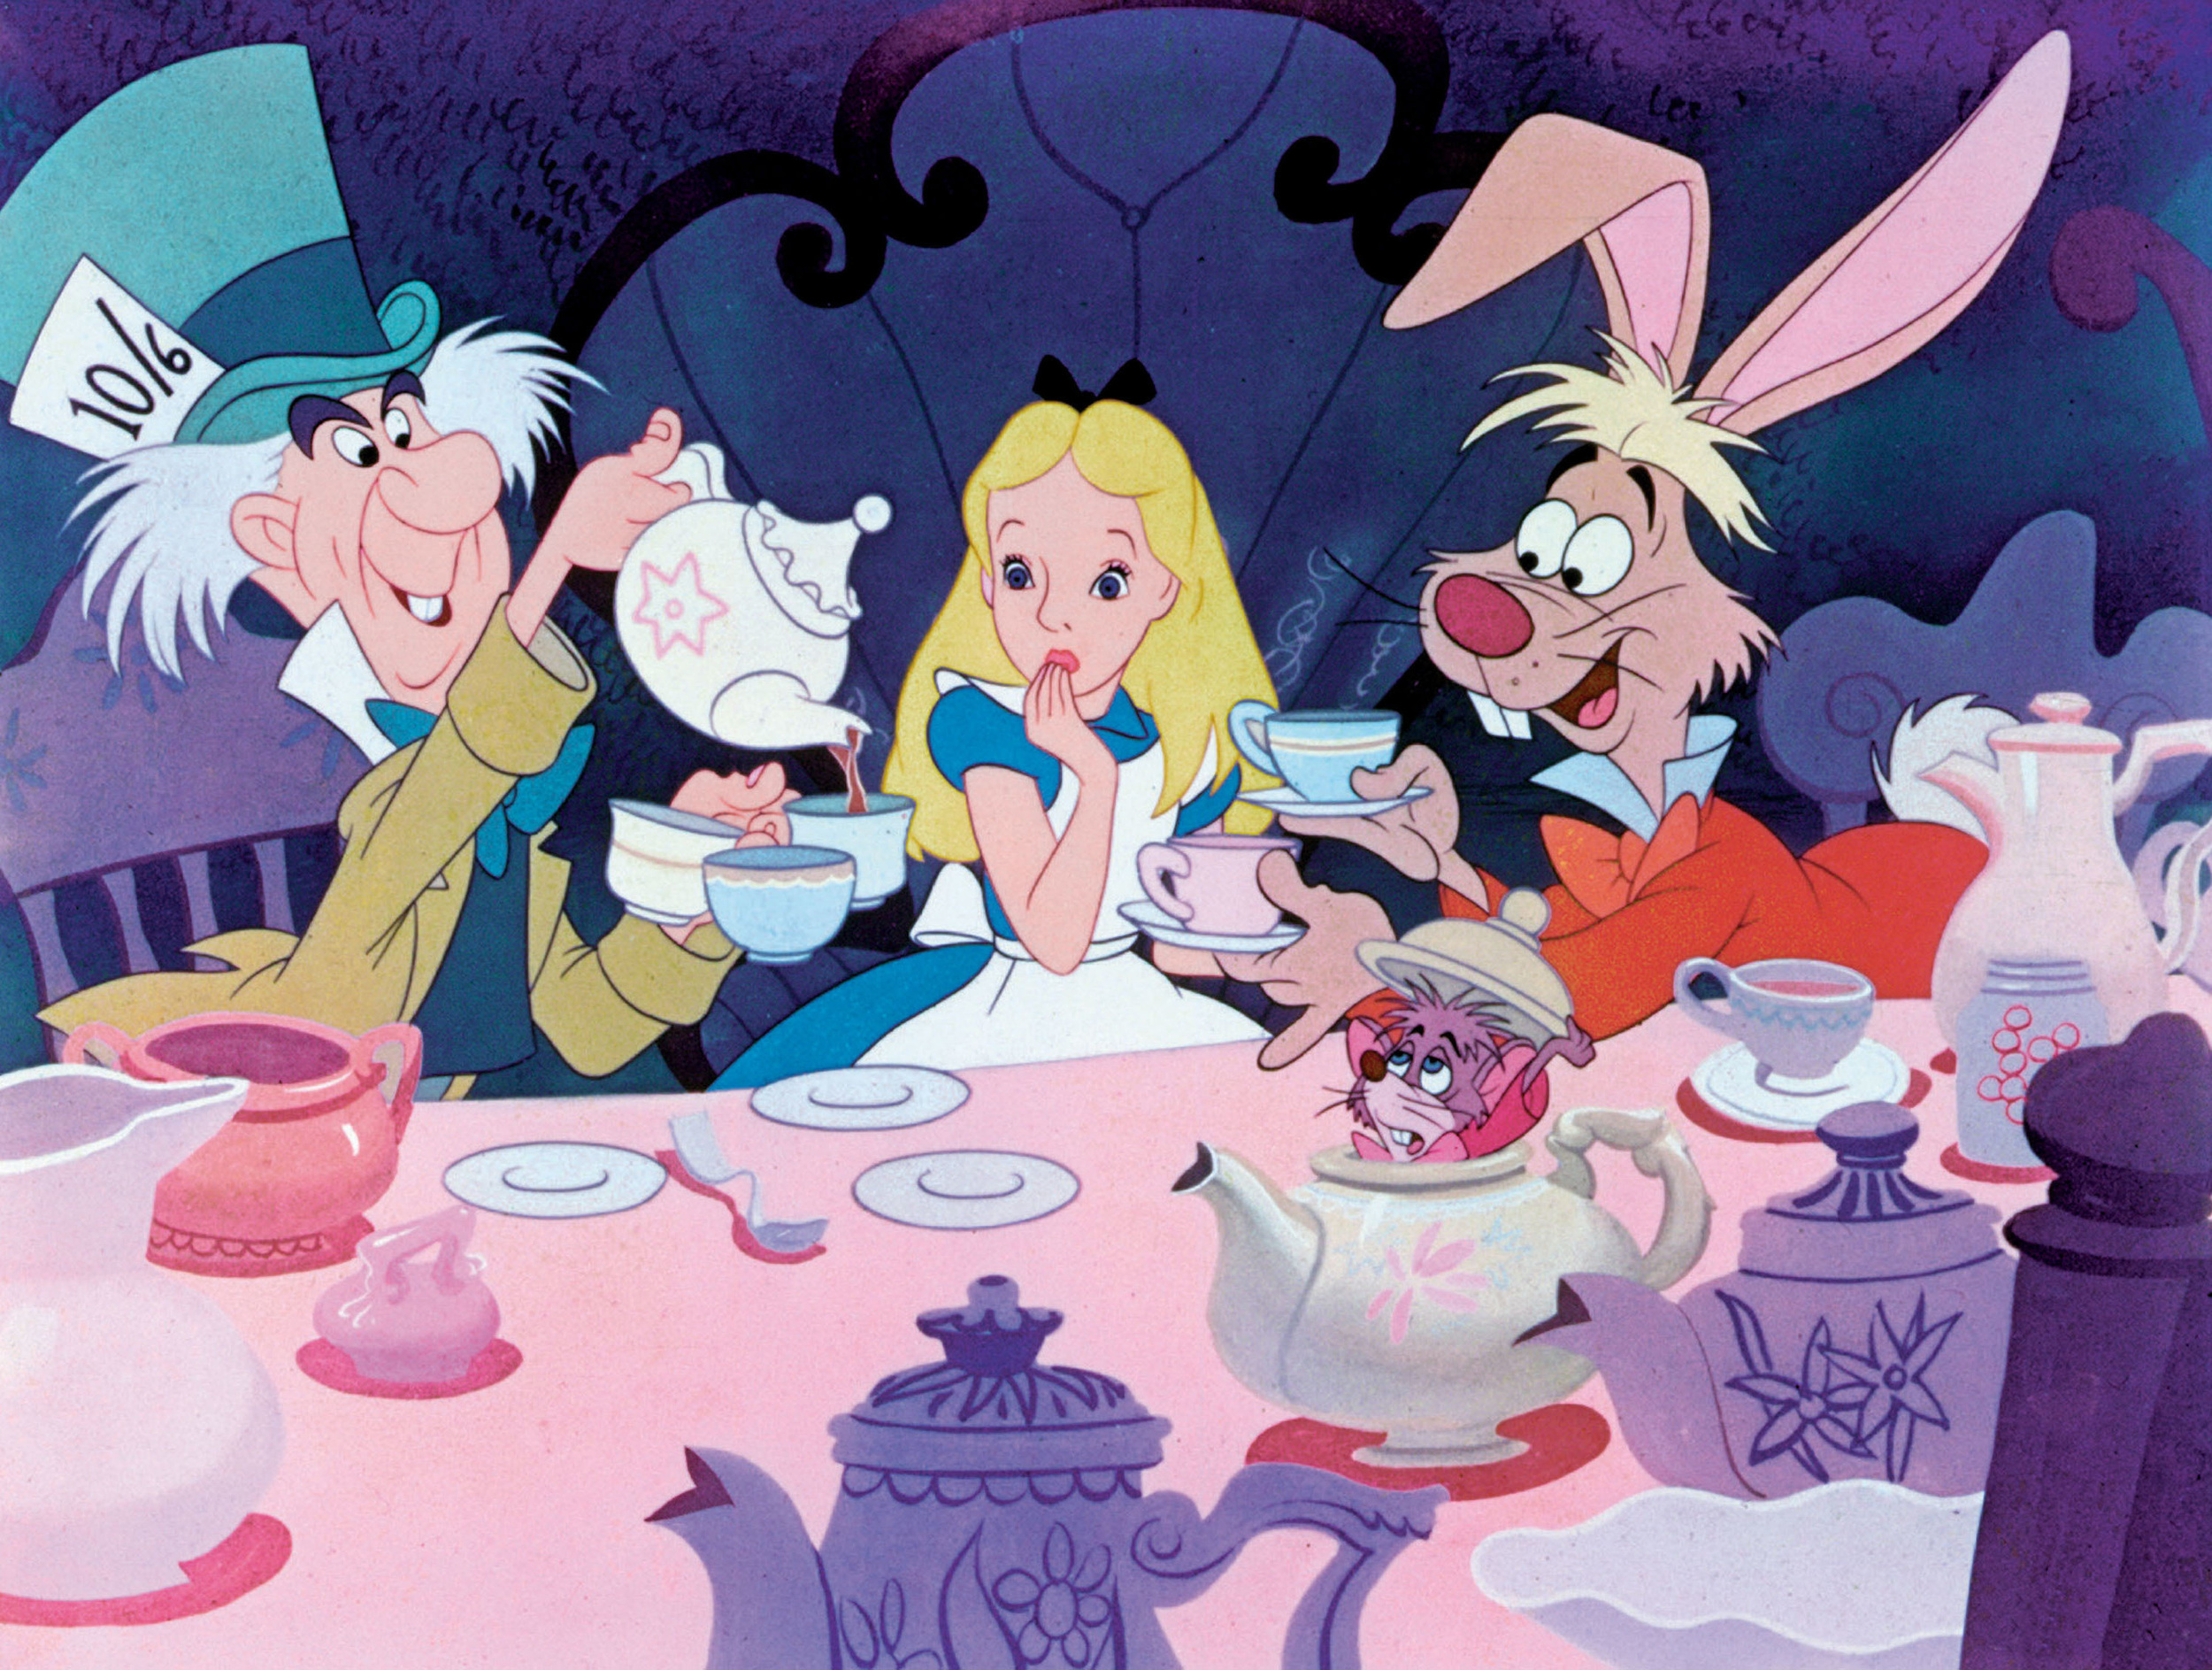 <p>Disney spent many years trying to adapt Lewis Carroll's whimsical, absurdist story into an animated film. Almost every great writer tried to adapt the story for film for Disney's studio. Aldous Huxley (<em>Brave New World</em>) even tried writing a script for Disney at one point. </p><p>By the time Disney settled on a script he liked, it still took five years and $3 million to produce a feature-length film for theaters. Like every new Disney animated film, the stakes were raised higher and higher, and believe it or not, the final release was considered a critical failure for the studio. So, how does a failure fit into Disney's foundation? For starters, its achievements in character and scene design showed how both could be leveraged to make engaging stories that jumped off the screen. </p><p><a href='https://www.msn.com/en-us/community/channel/vid-cj9pqbr0vn9in2b6ddcd8sfgpfq6x6utp44fssrv6mc2gtybw0us'>Follow us on MSN to see more of our exclusive entertainment content.</a></p>